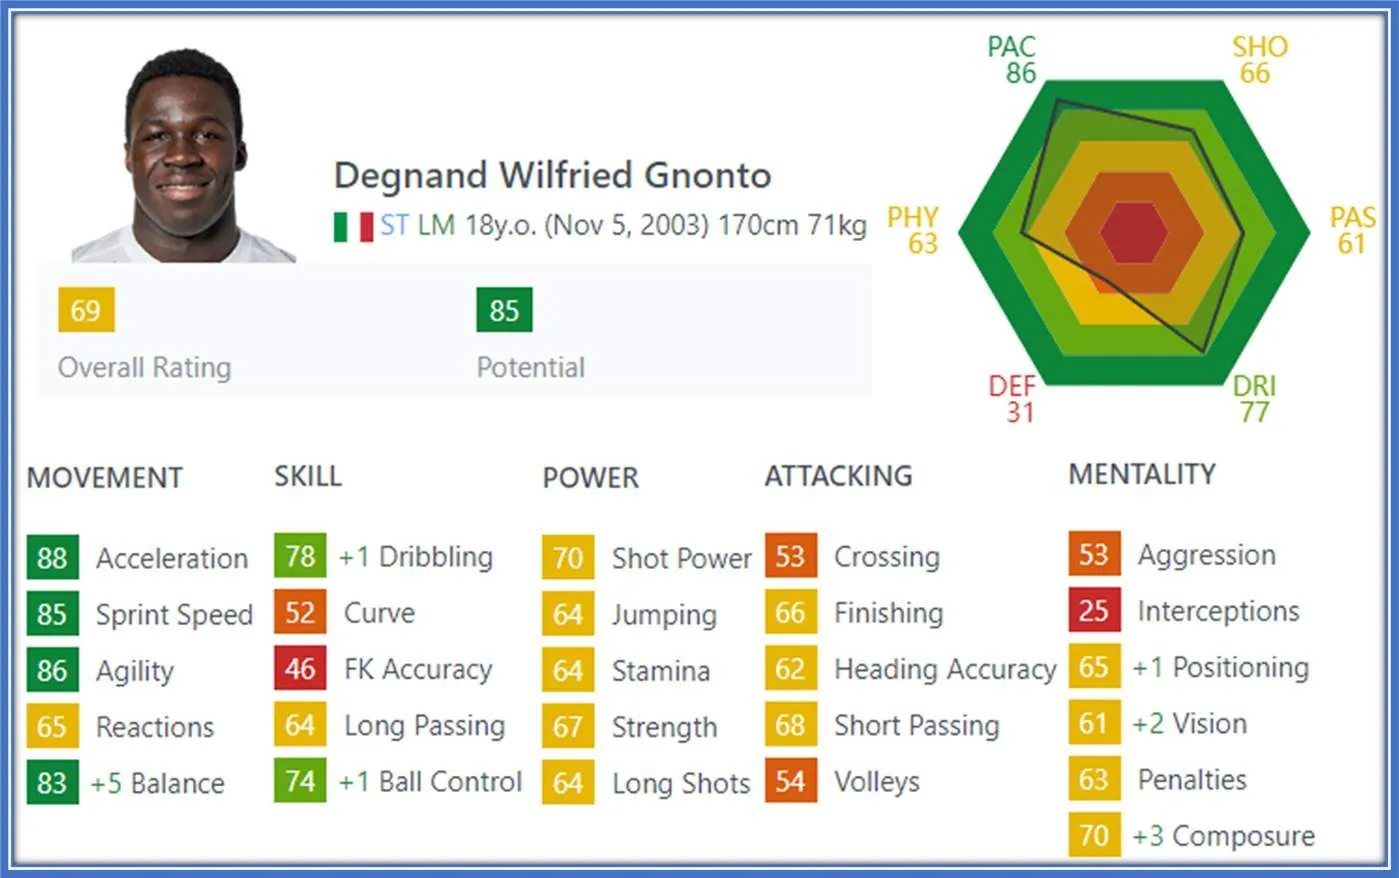 With these massive movement stats, he does pride himself as a Speed Demon.